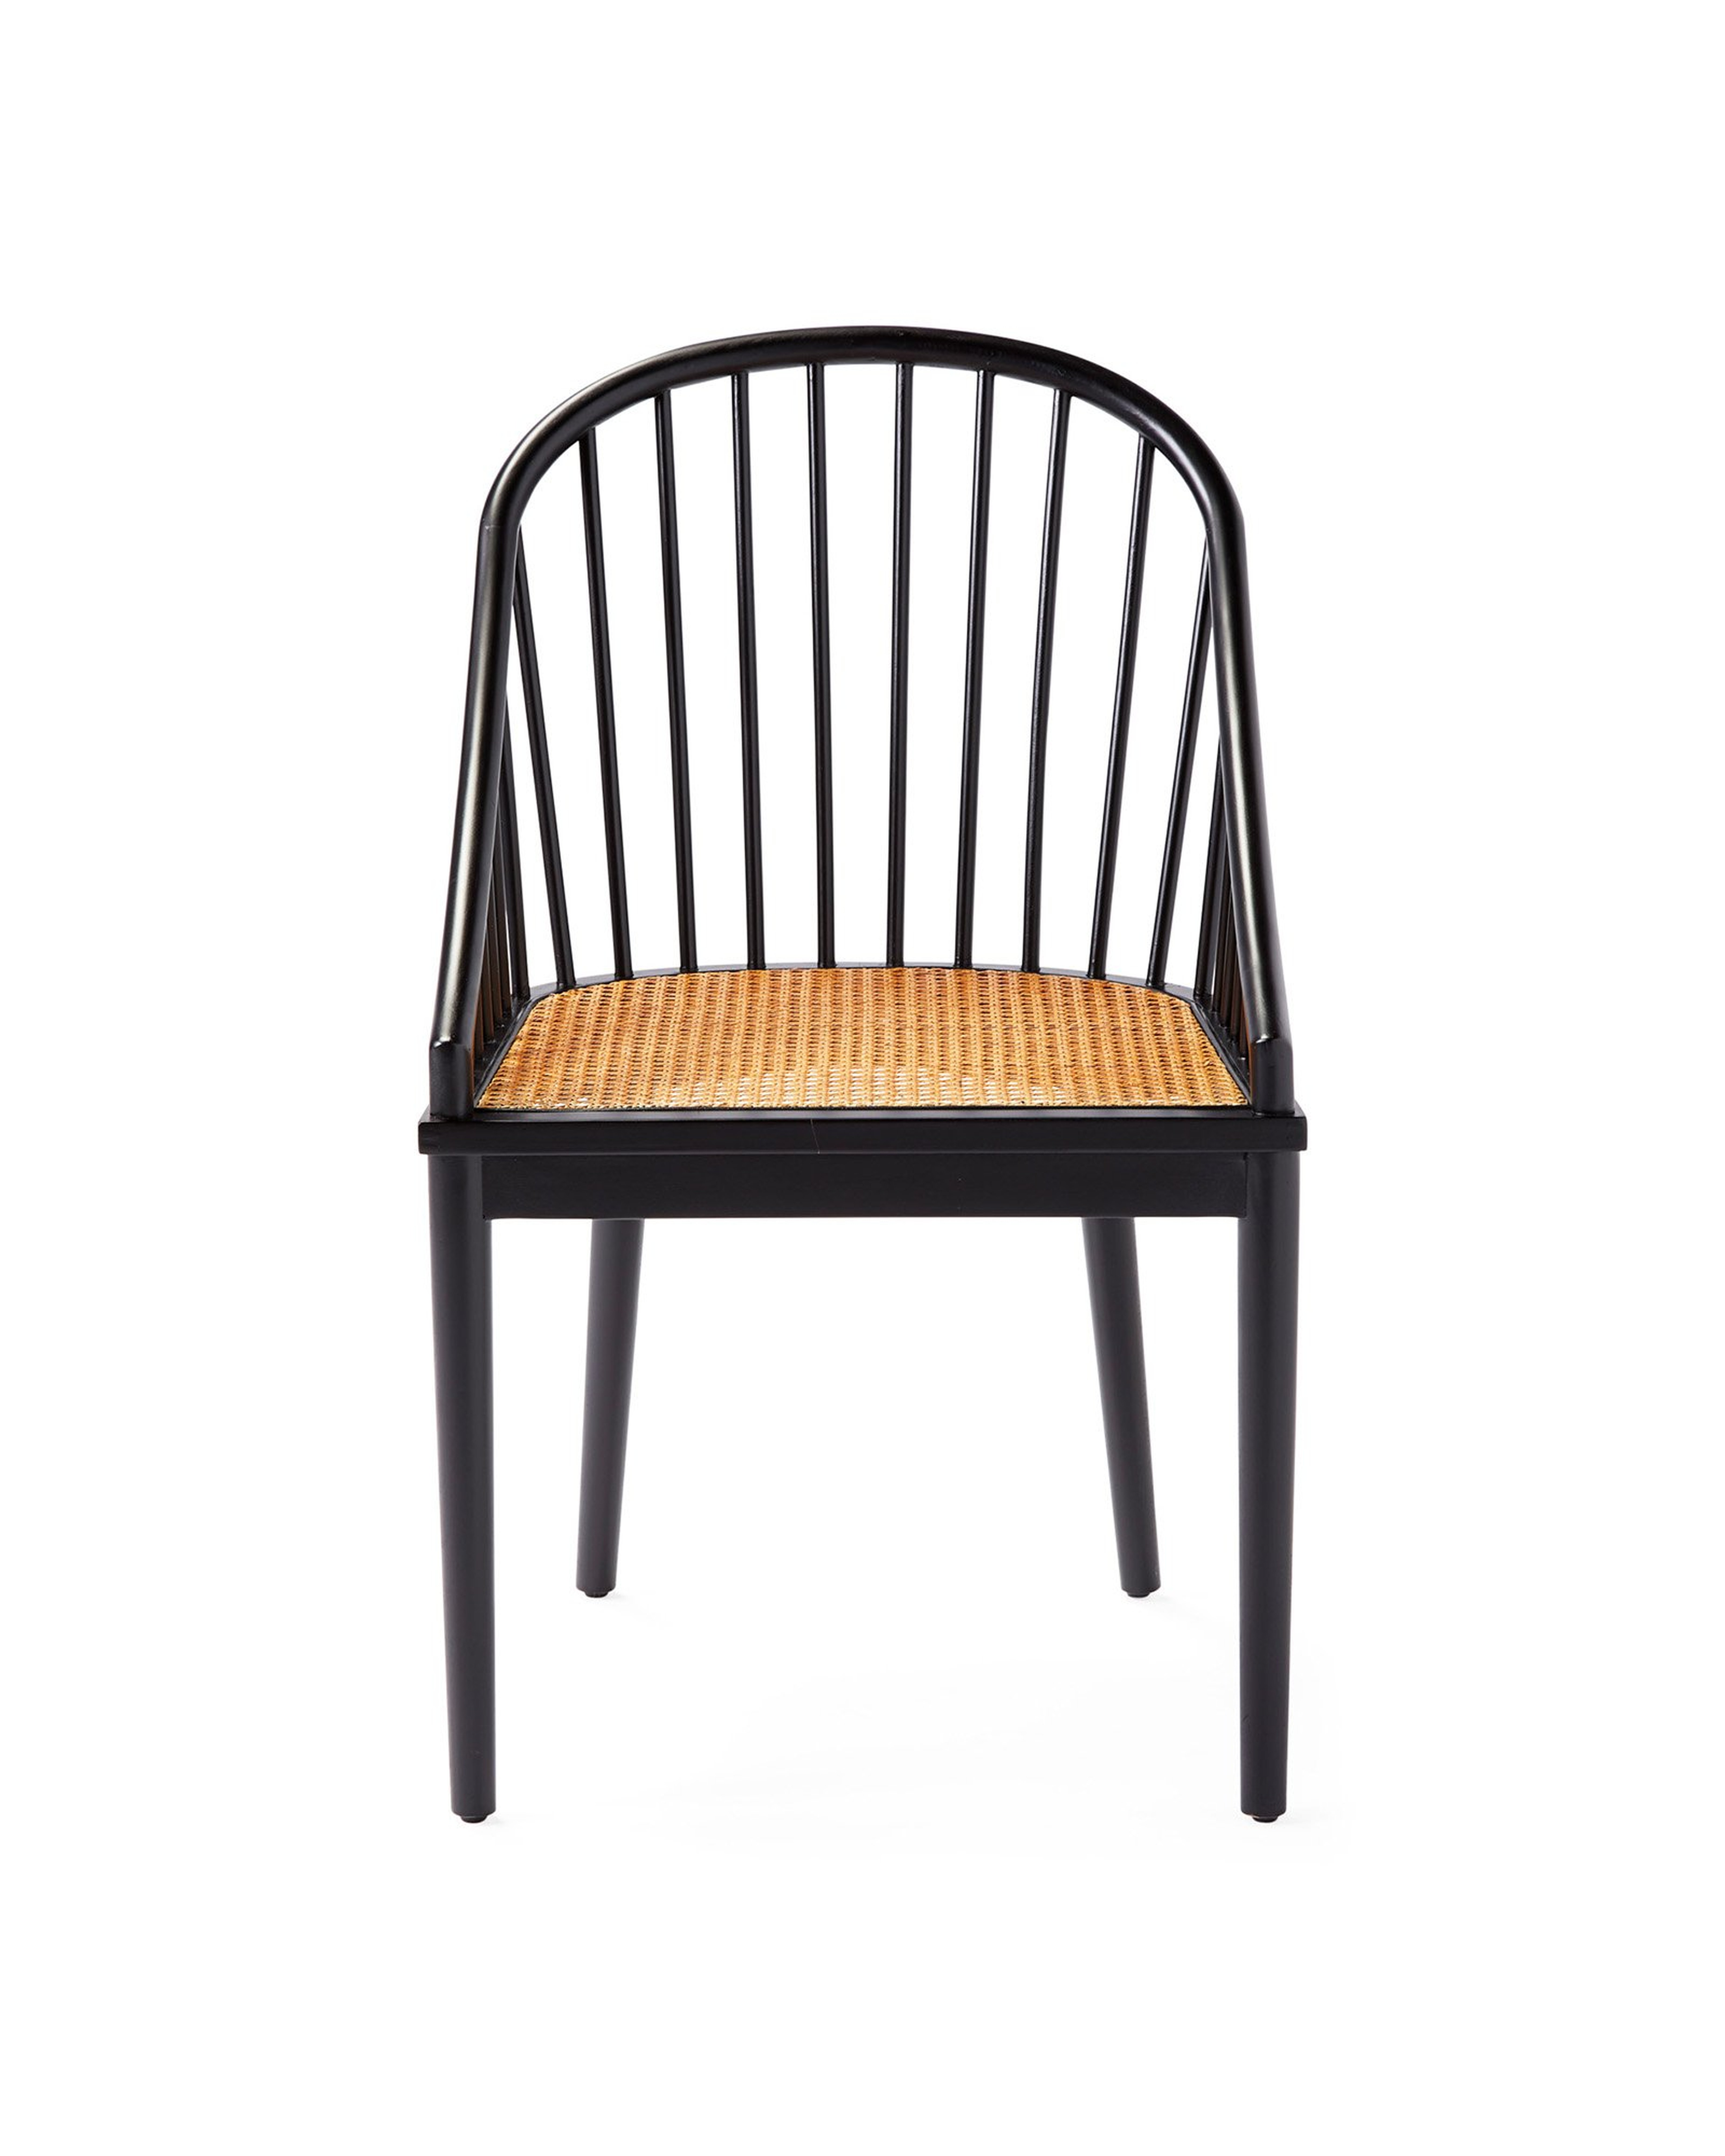 Millbrook Dining Chair - Serena and Lily